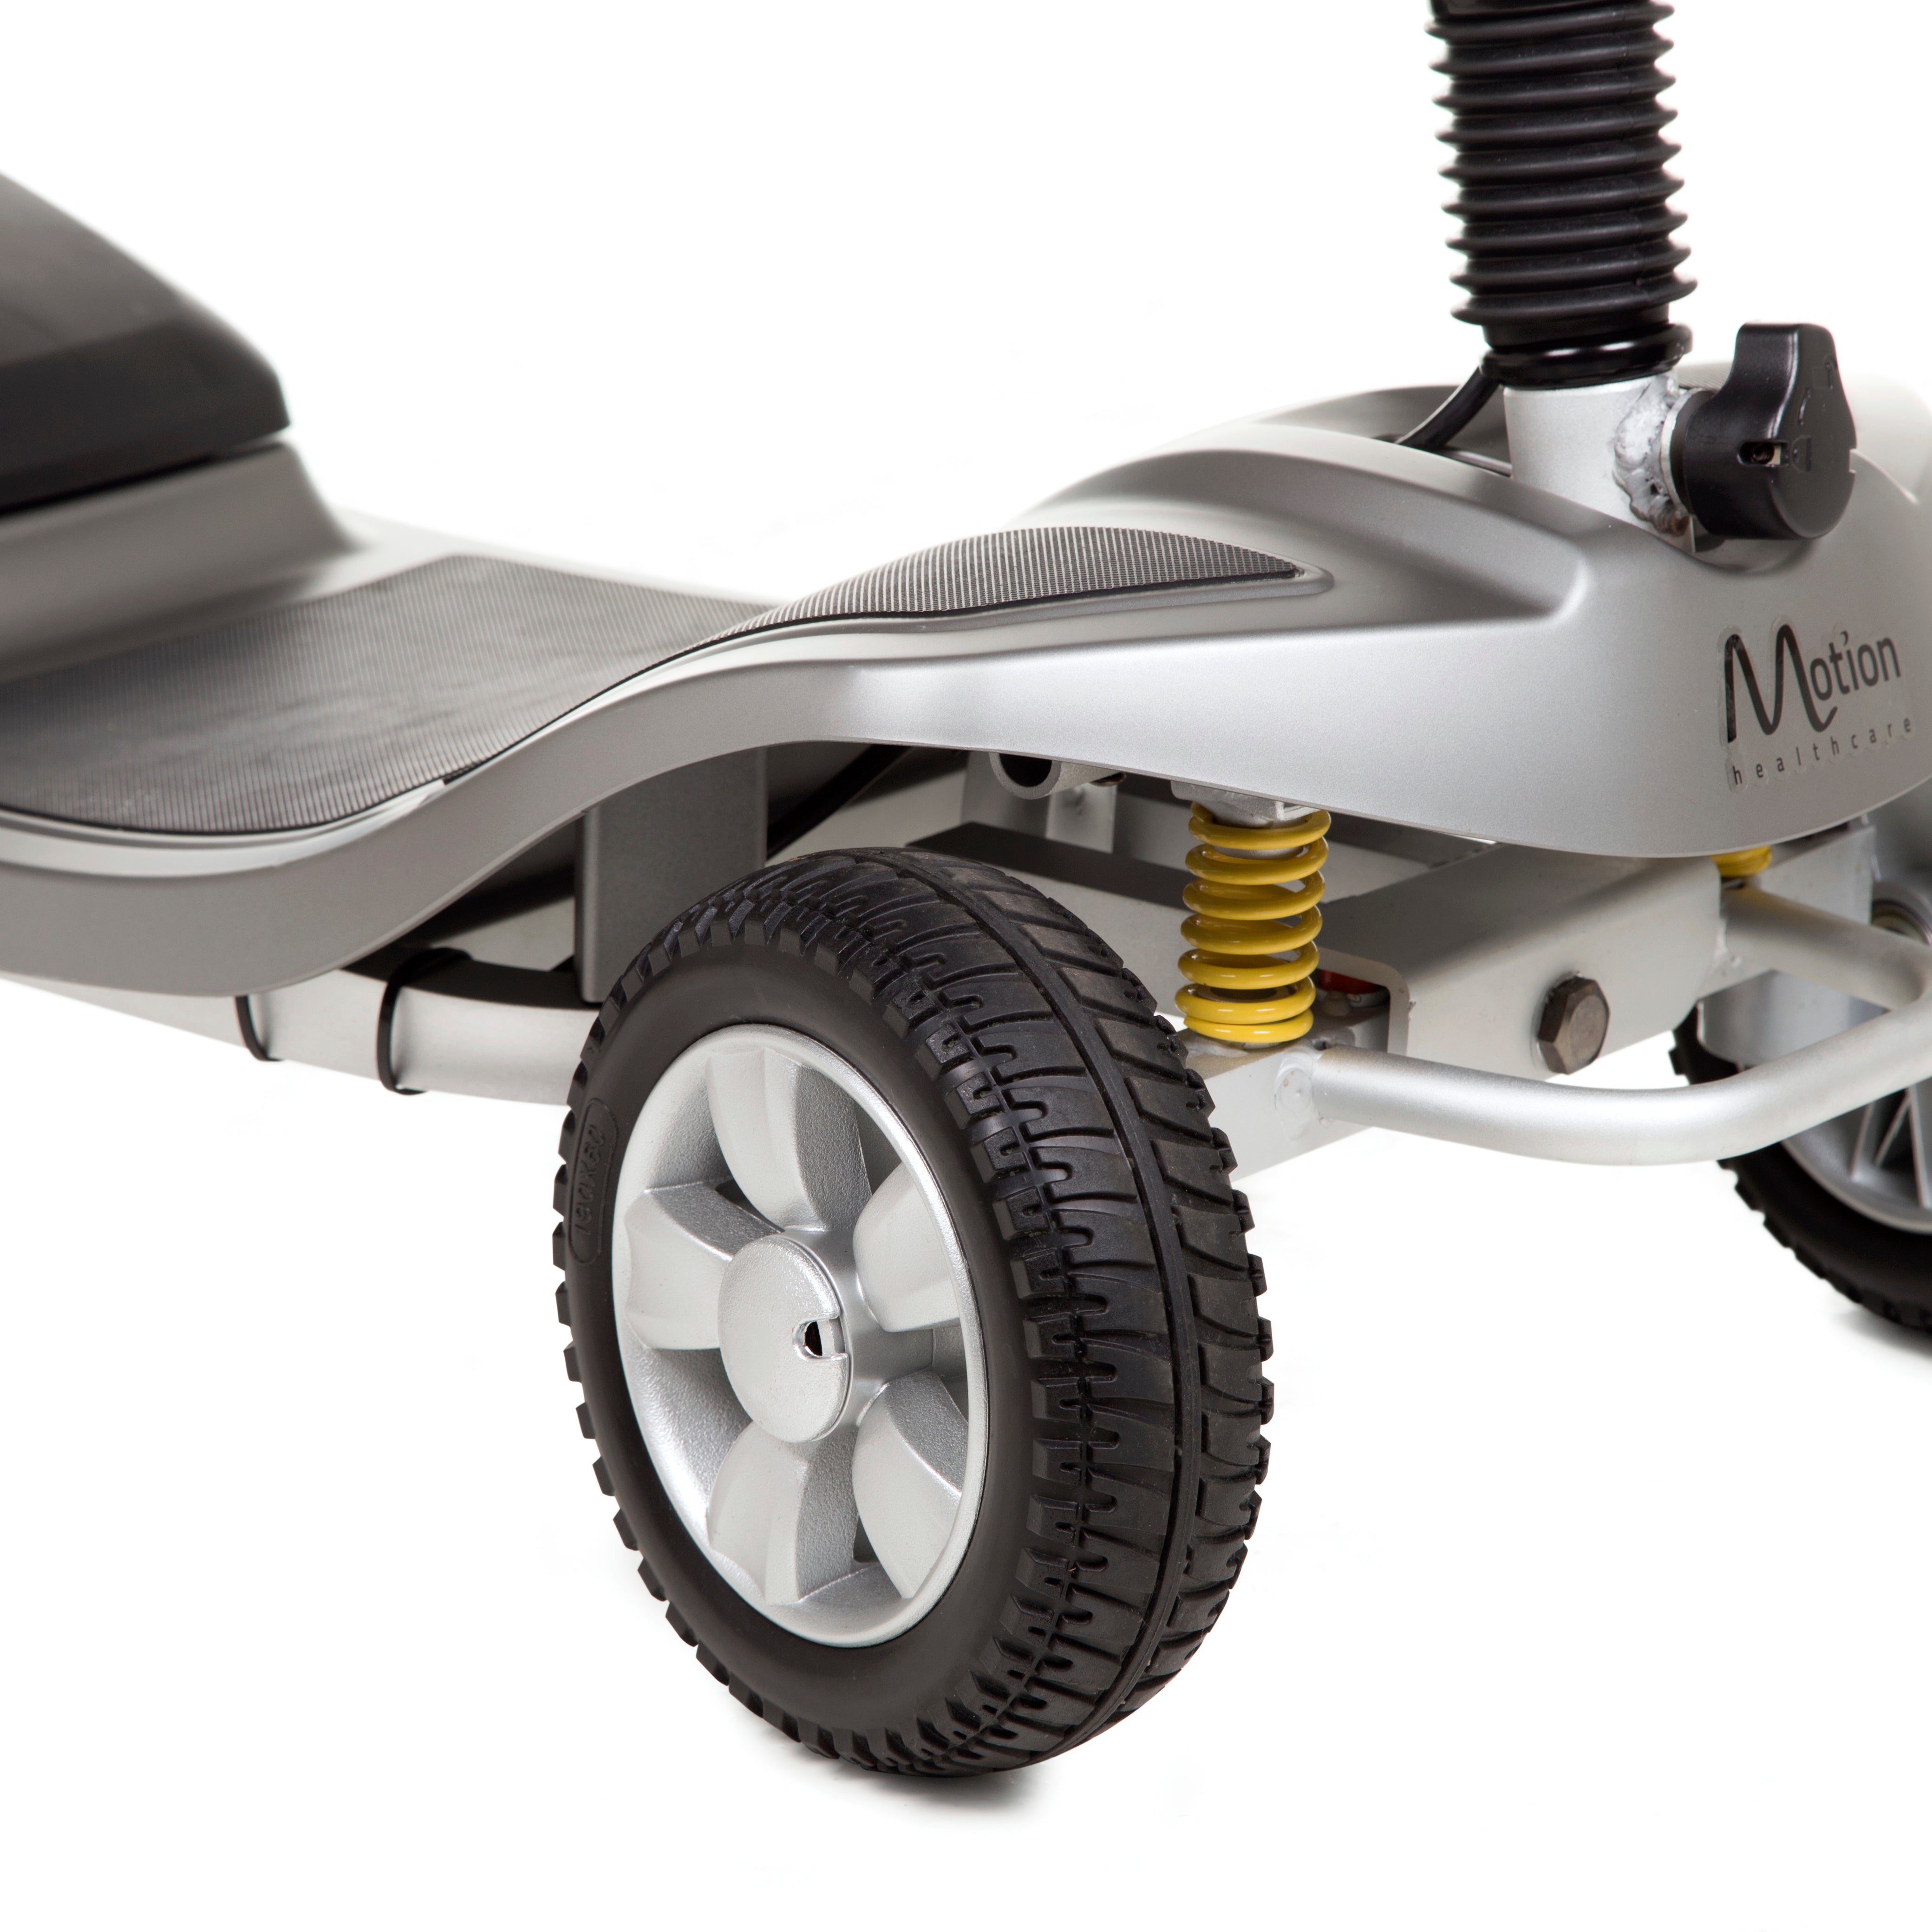 Motion Healthcare Alumina – Lightweight Mobility Boot Scooter